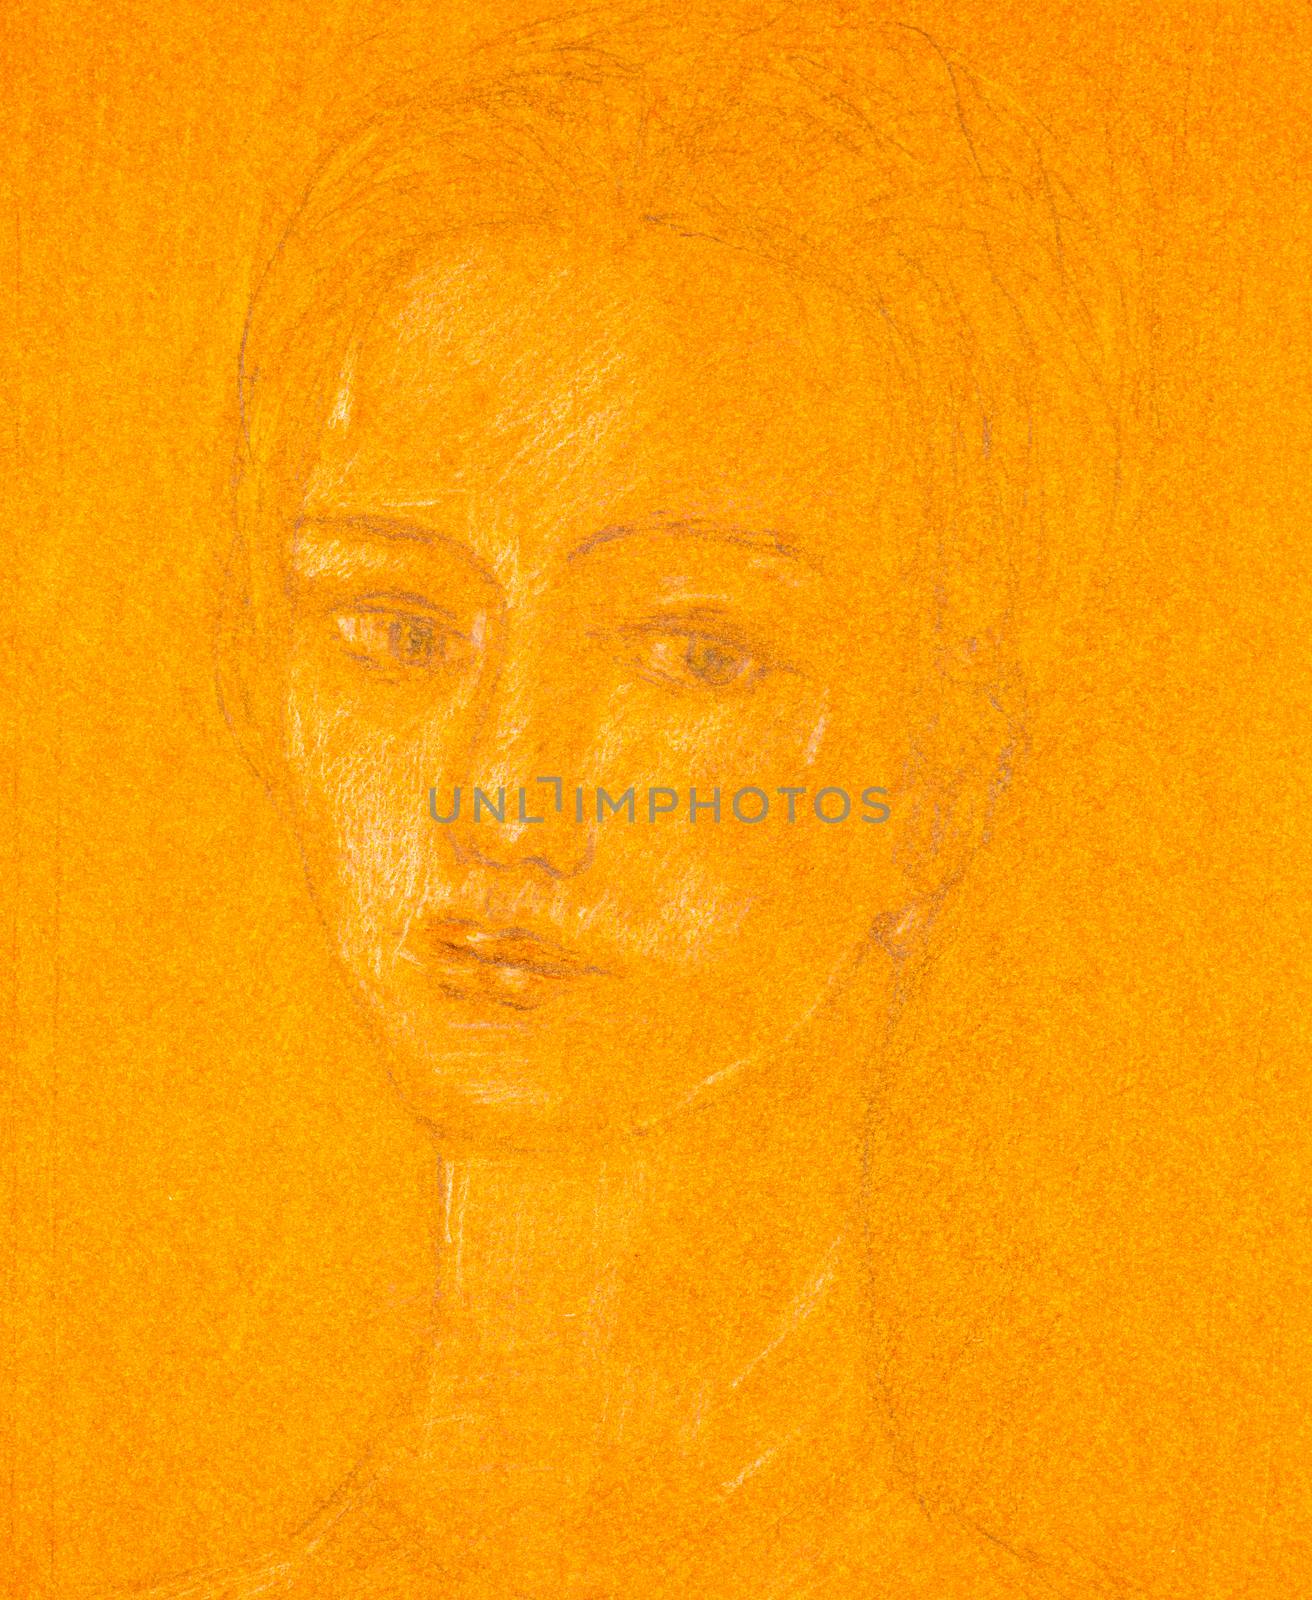 Faint Sketch of a Young Woman Portrait by viscorp